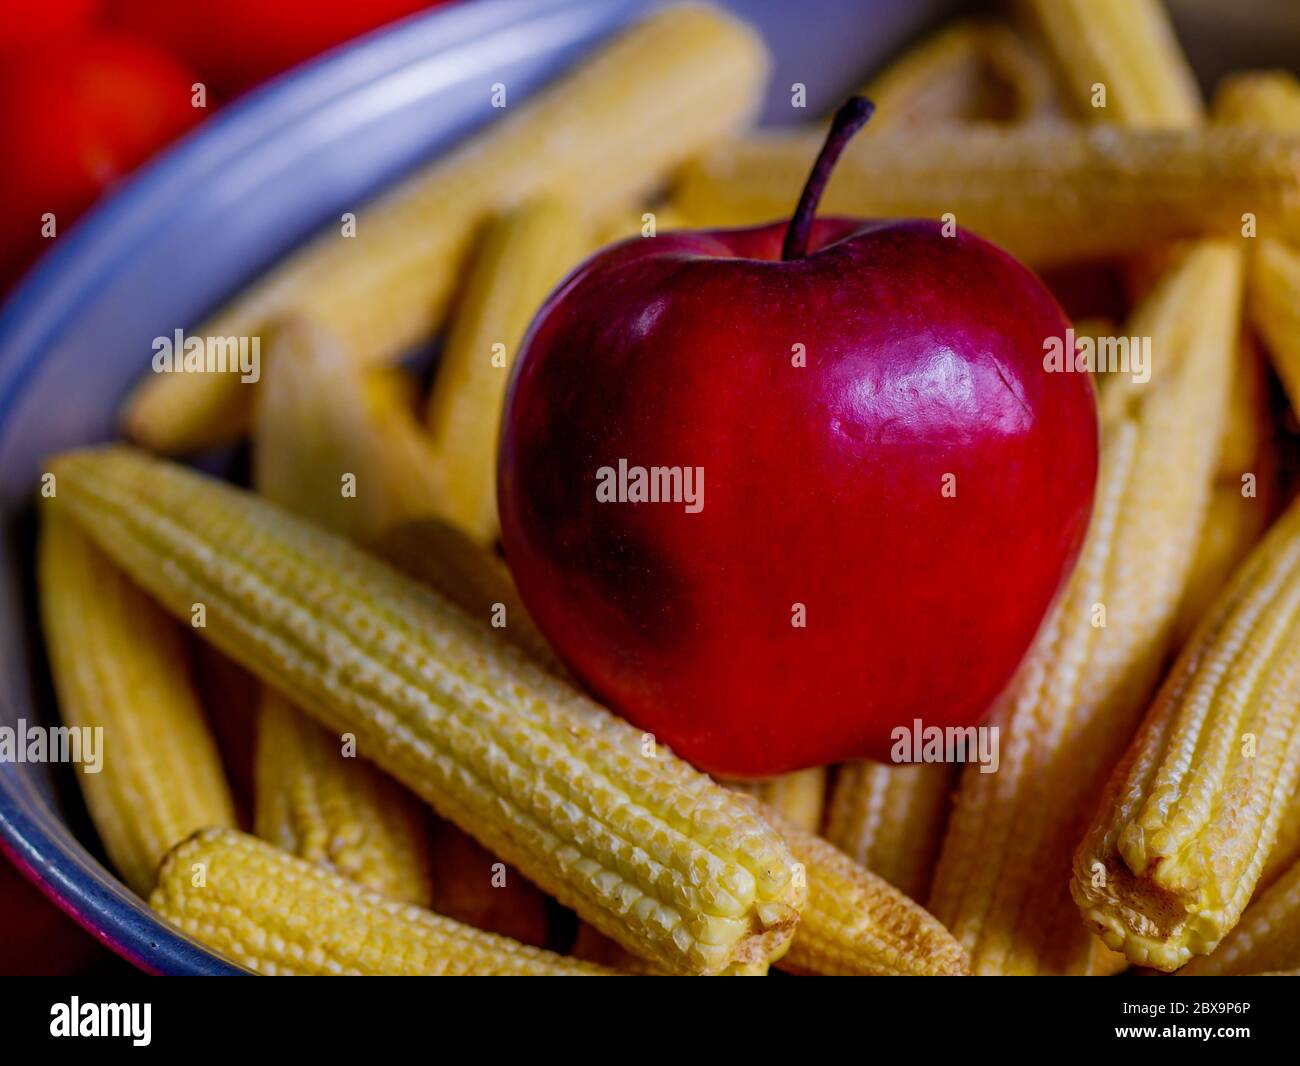 Fresh Apple and Baby corns arranged in a basket with tomatoes and green veggies in background Stock Photo